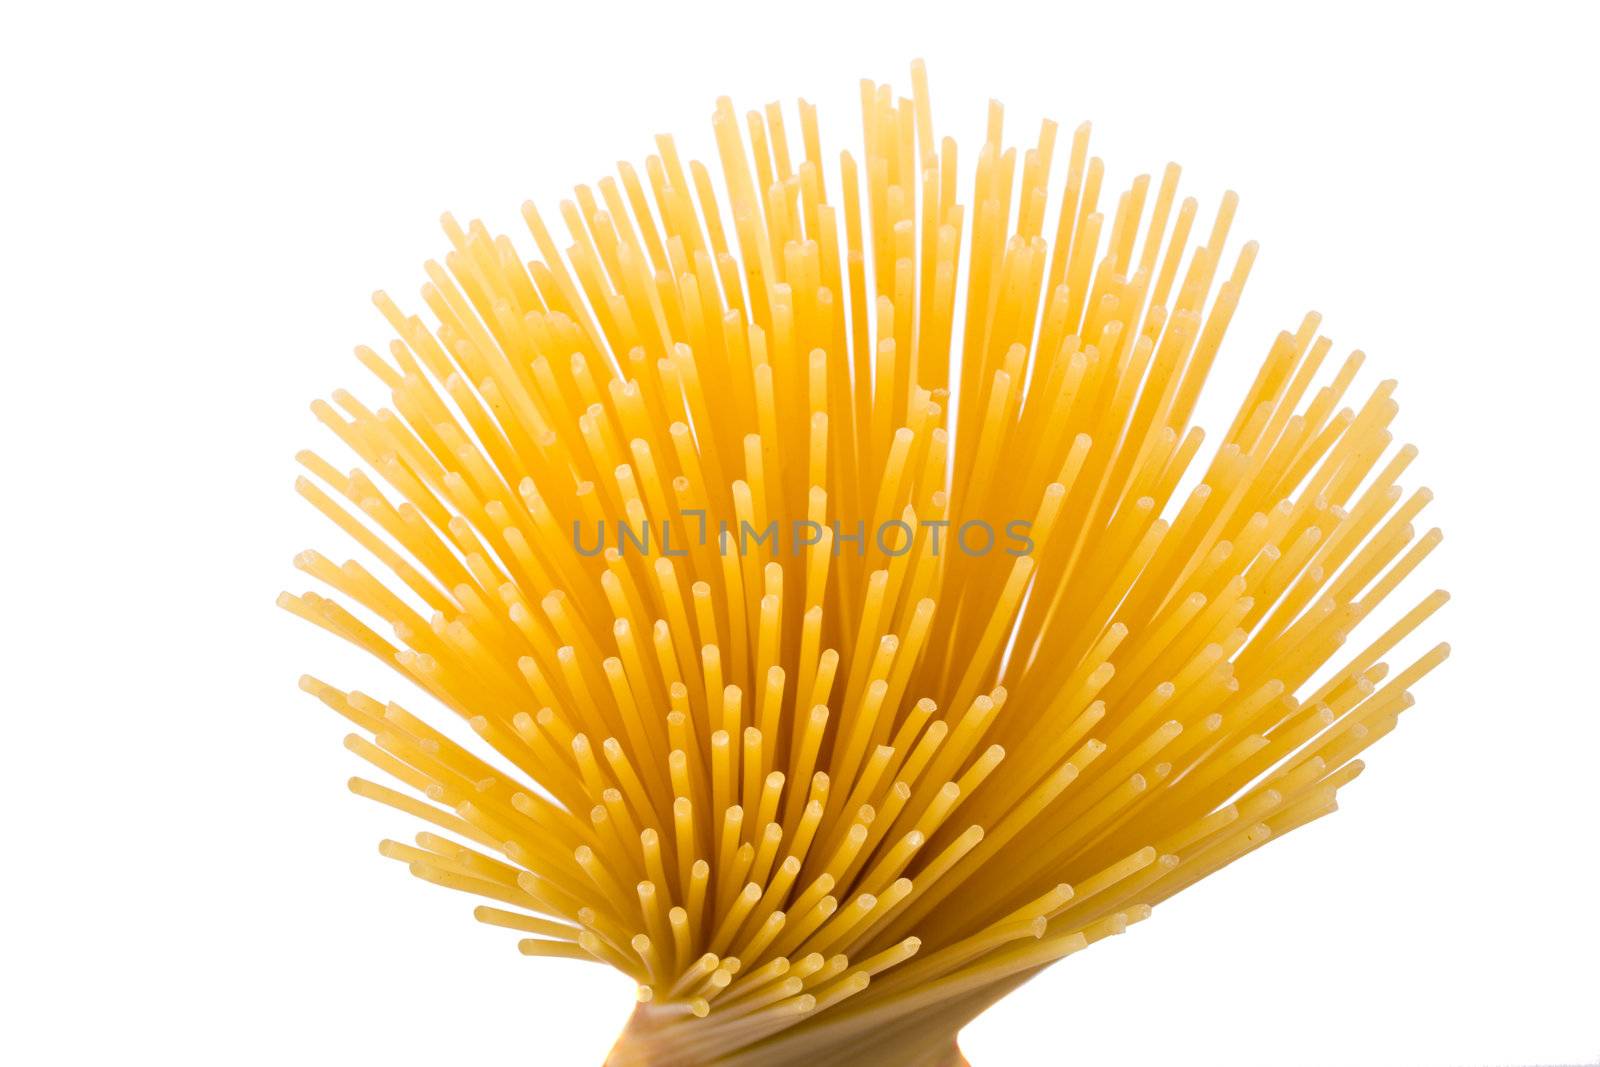 rays of spaghetti on white background by bernjuer